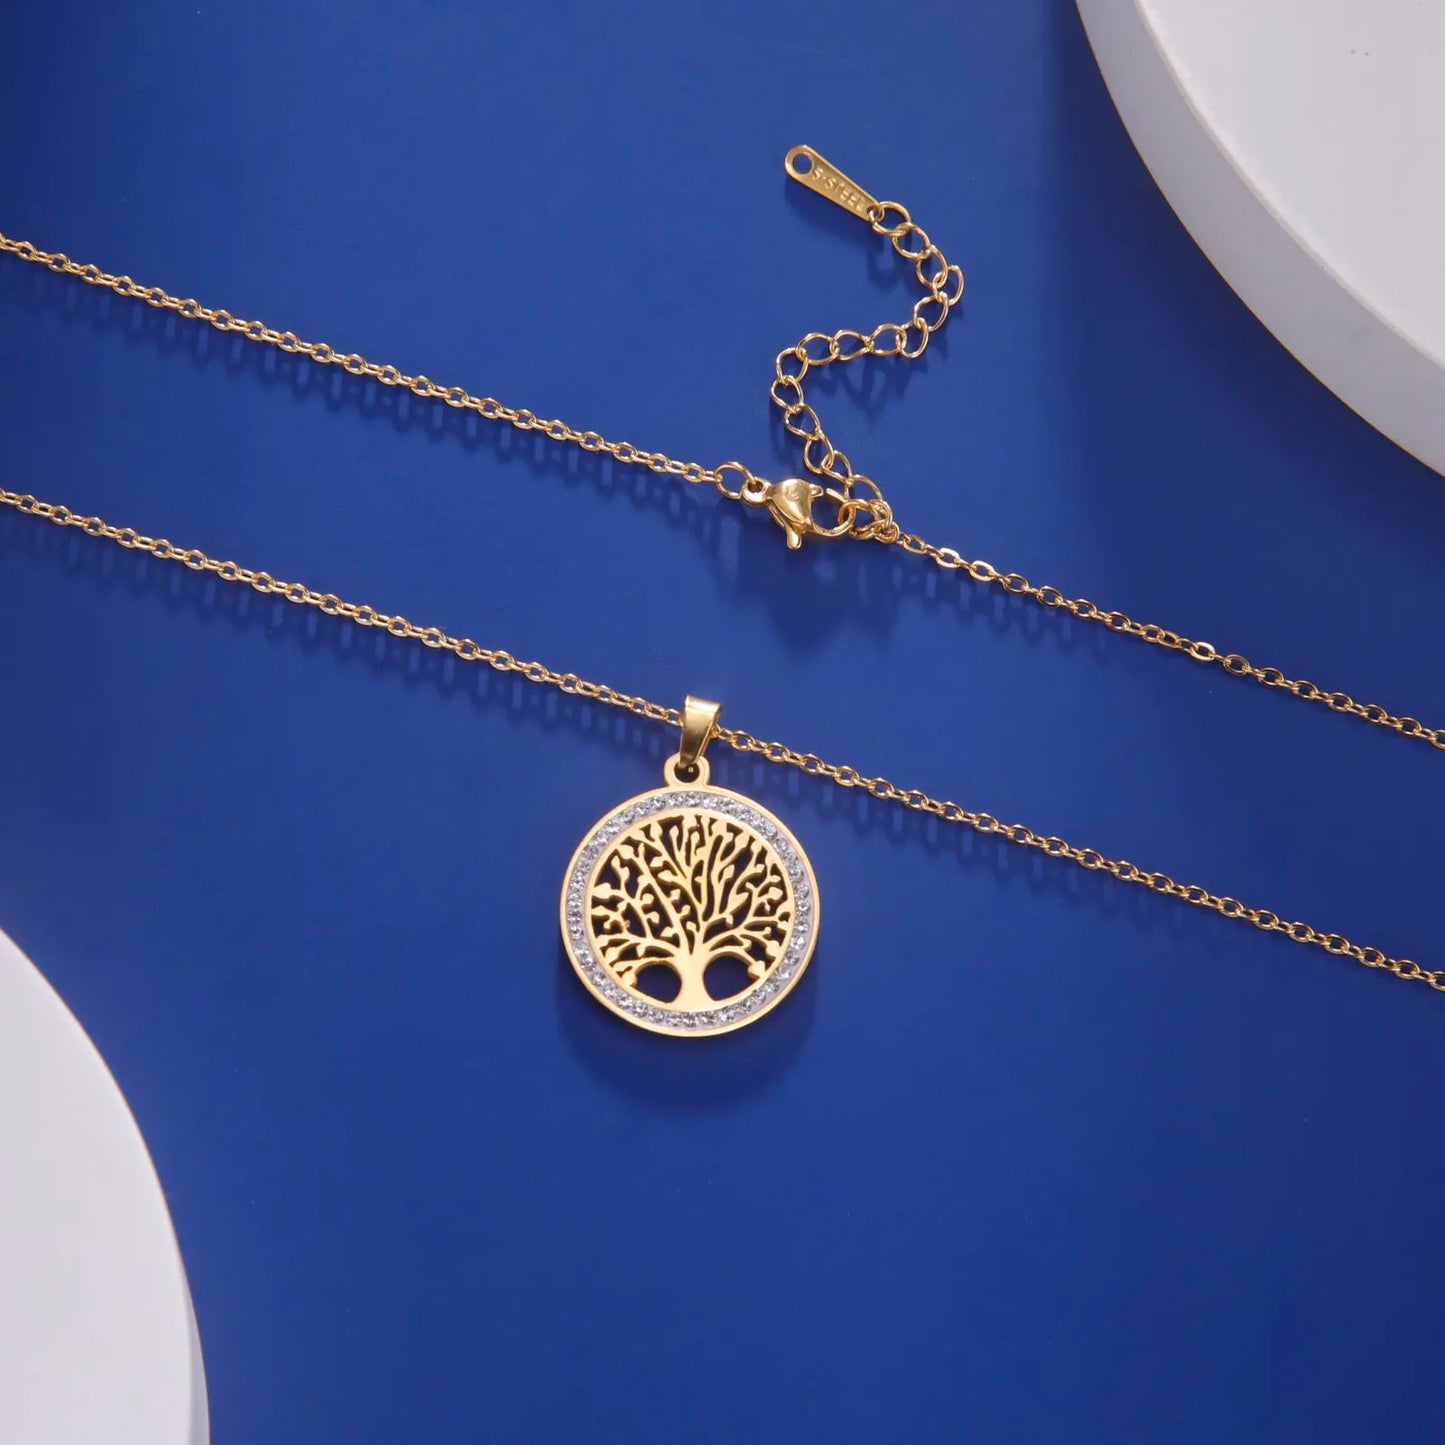 Tree Necklace Wear The Peace Necklaces Gold